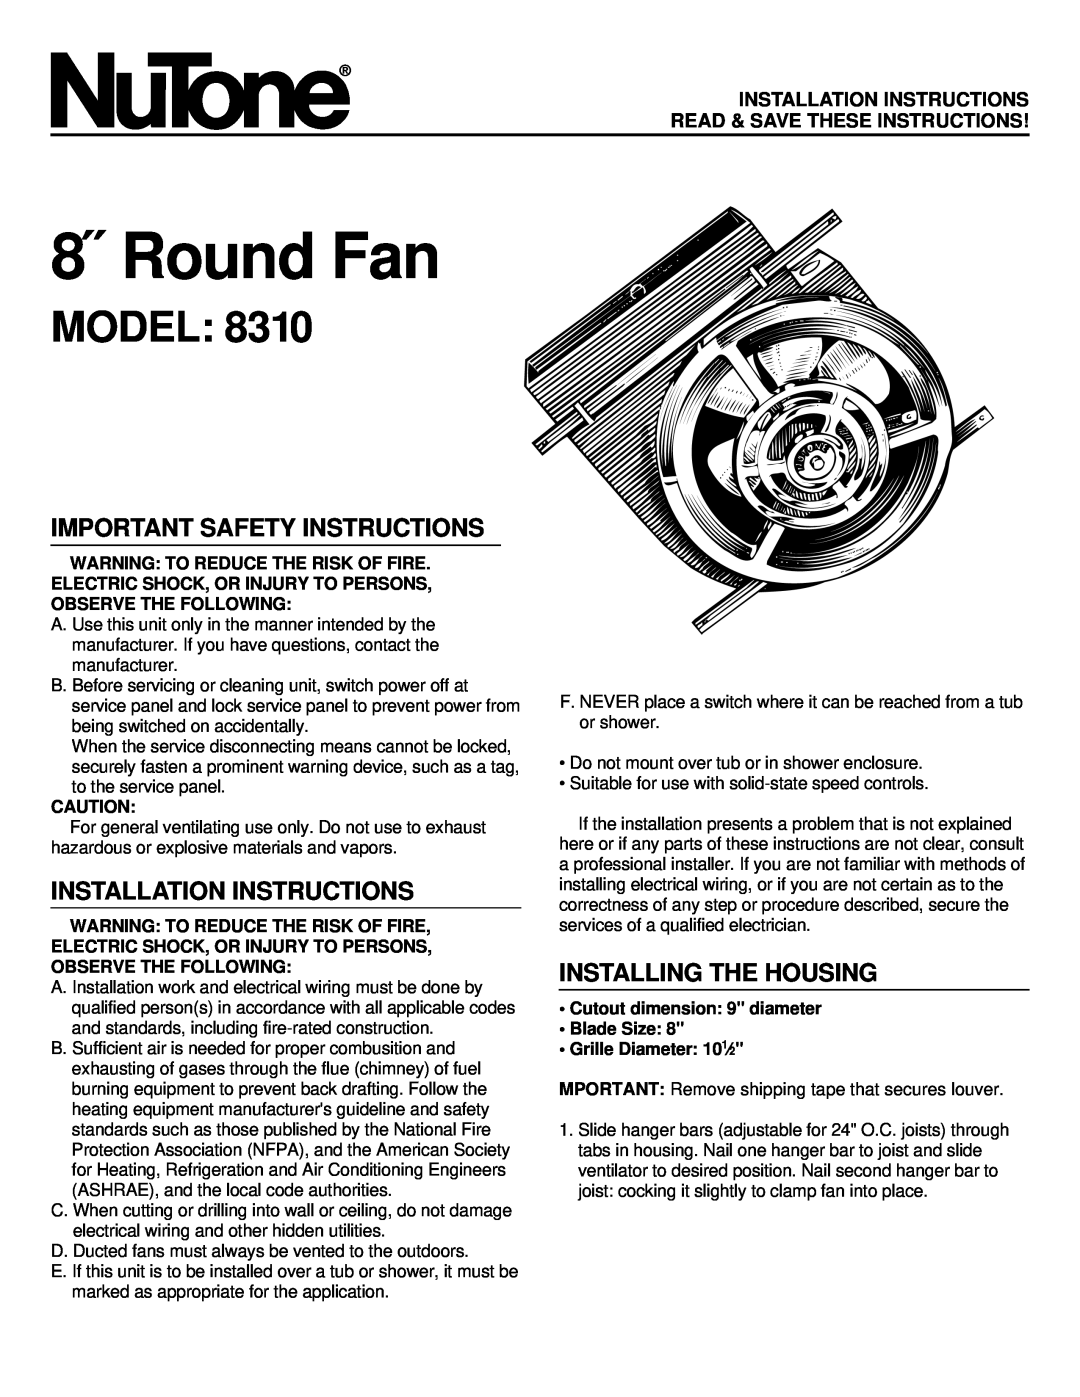 NuTone 8310 installation instructions Important Safety Instructions, Installation Instructions, Installing The Housing 